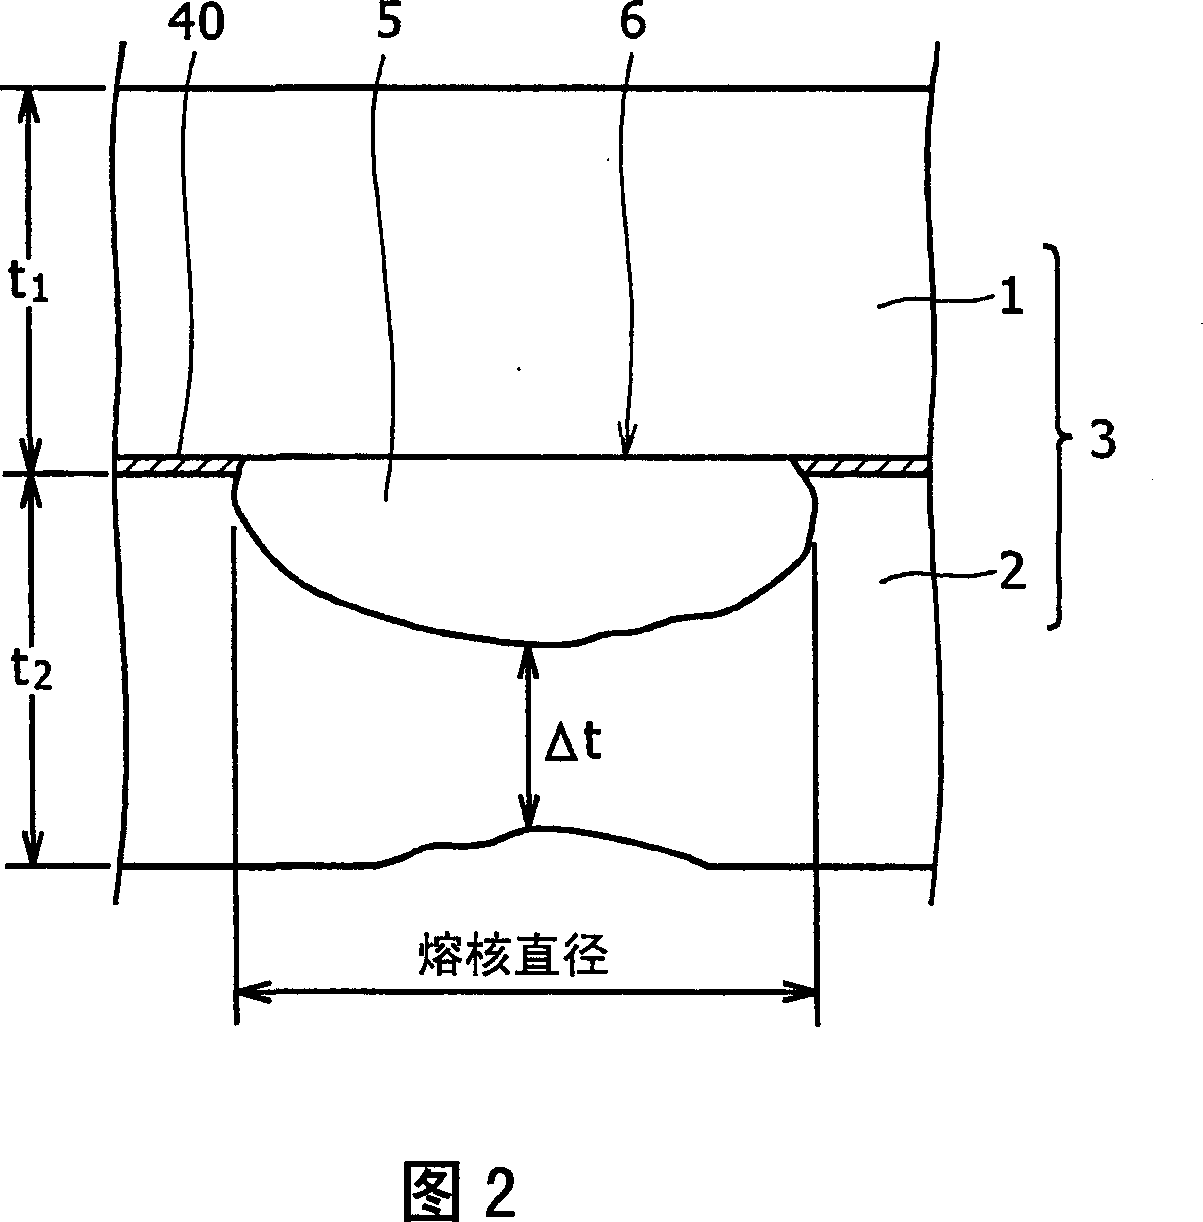 Joined body of different materials of steel material and aluminum material and method for joining the same